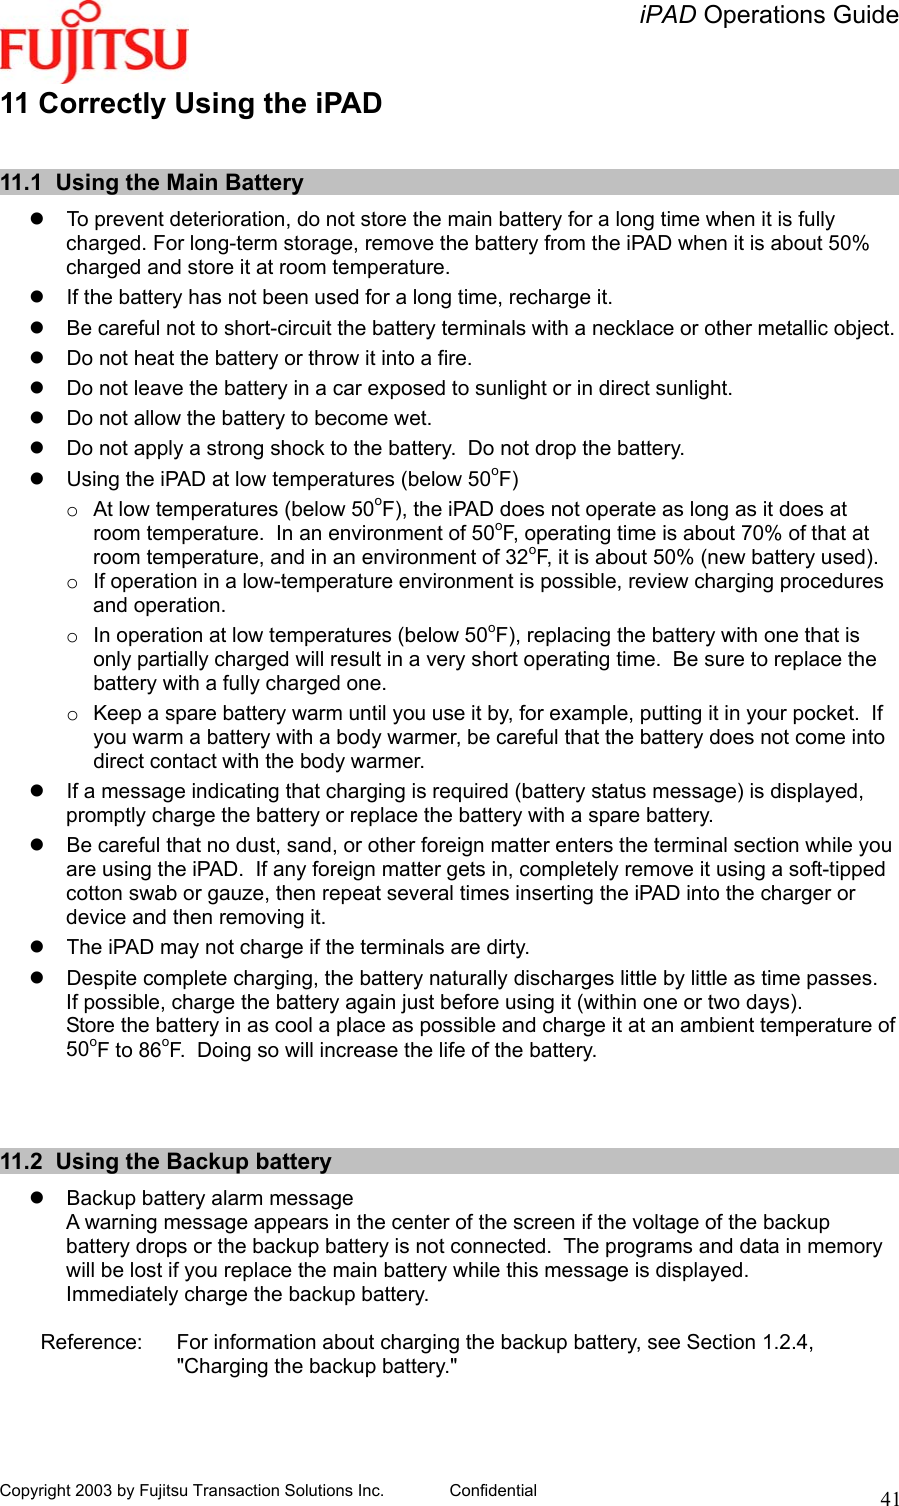   iPAD Operations Guide   Copyright 2003 by Fujitsu Transaction Solutions Inc. Confidential  4111 Correctly Using the iPAD  11.1  Using the Main Battery   To prevent deterioration, do not store the main battery for a long time when it is fully charged. For long-term storage, remove the battery from the iPAD when it is about 50% charged and store it at room temperature.   If the battery has not been used for a long time, recharge it.   Be careful not to short-circuit the battery terminals with a necklace or other metallic object.   Do not heat the battery or throw it into a fire.   Do not leave the battery in a car exposed to sunlight or in direct sunlight.   Do not allow the battery to become wet.   Do not apply a strong shock to the battery.  Do not drop the battery.   Using the iPAD at low temperatures (below 50oF) o  At low temperatures (below 50oF), the iPAD does not operate as long as it does at room temperature.  In an environment of 50oF, operating time is about 70% of that at room temperature, and in an environment of 32oF, it is about 50% (new battery used). o  If operation in a low-temperature environment is possible, review charging procedures and operation. o  In operation at low temperatures (below 50oF), replacing the battery with one that is only partially charged will result in a very short operating time.  Be sure to replace the battery with a fully charged one. o  Keep a spare battery warm until you use it by, for example, putting it in your pocket.  If you warm a battery with a body warmer, be careful that the battery does not come into direct contact with the body warmer.    If a message indicating that charging is required (battery status message) is displayed, promptly charge the battery or replace the battery with a spare battery.   Be careful that no dust, sand, or other foreign matter enters the terminal section while you are using the iPAD.  If any foreign matter gets in, completely remove it using a soft-tipped cotton swab or gauze, then repeat several times inserting the iPAD into the charger or device and then removing it.   The iPAD may not charge if the terminals are dirty.   Despite complete charging, the battery naturally discharges little by little as time passes.  If possible, charge the battery again just before using it (within one or two days). Store the battery in as cool a place as possible and charge it at an ambient temperature of 50oF to 86oF.  Doing so will increase the life of the battery.    11.2  Using the Backup battery   Backup battery alarm message  A warning message appears in the center of the screen if the voltage of the backup battery drops or the backup battery is not connected.  The programs and data in memory will be lost if you replace the main battery while this message is displayed. Immediately charge the backup battery.    Reference:  For information about charging the backup battery, see Section 1.2.4, &quot;Charging the backup battery.&quot;  